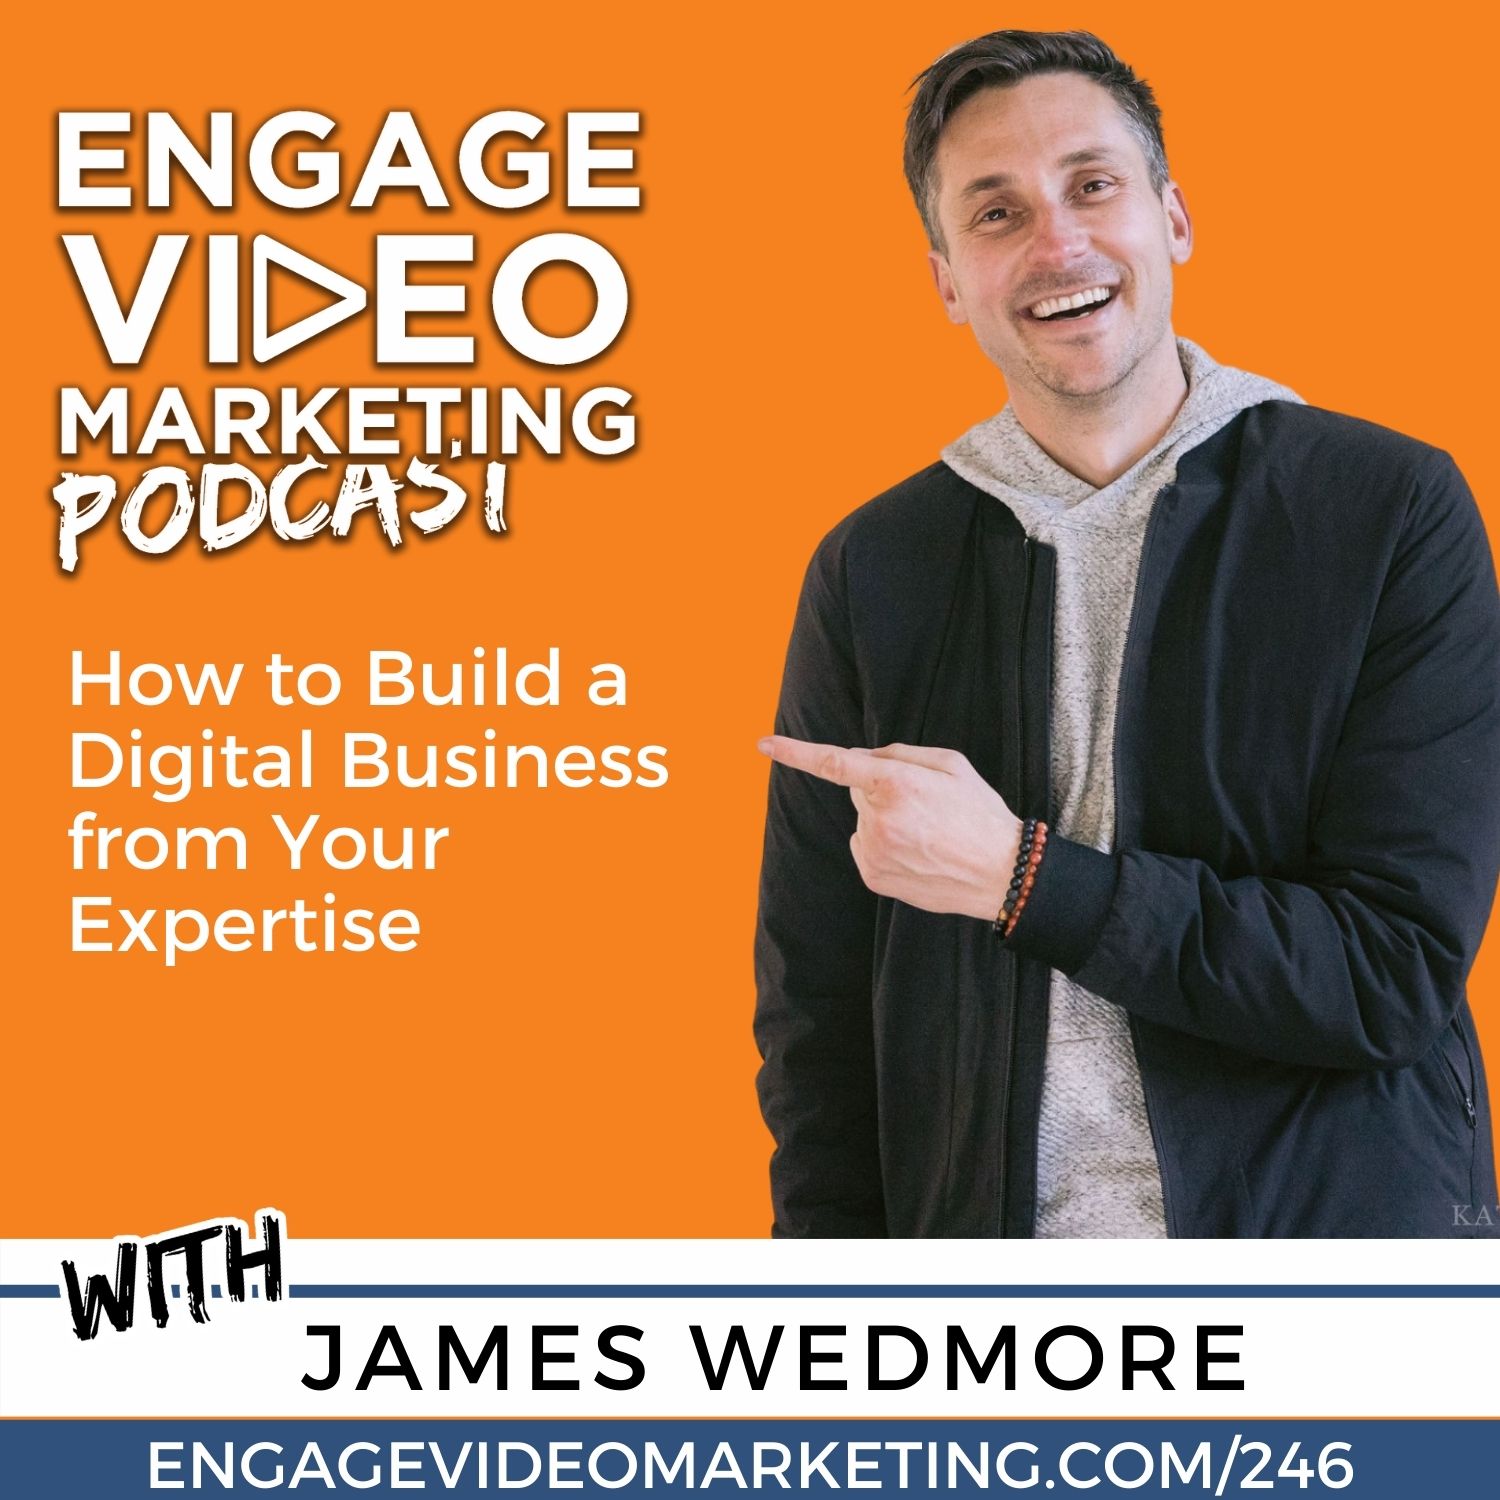 How to Build a Digital Business from Your Expertise with James Wedmore